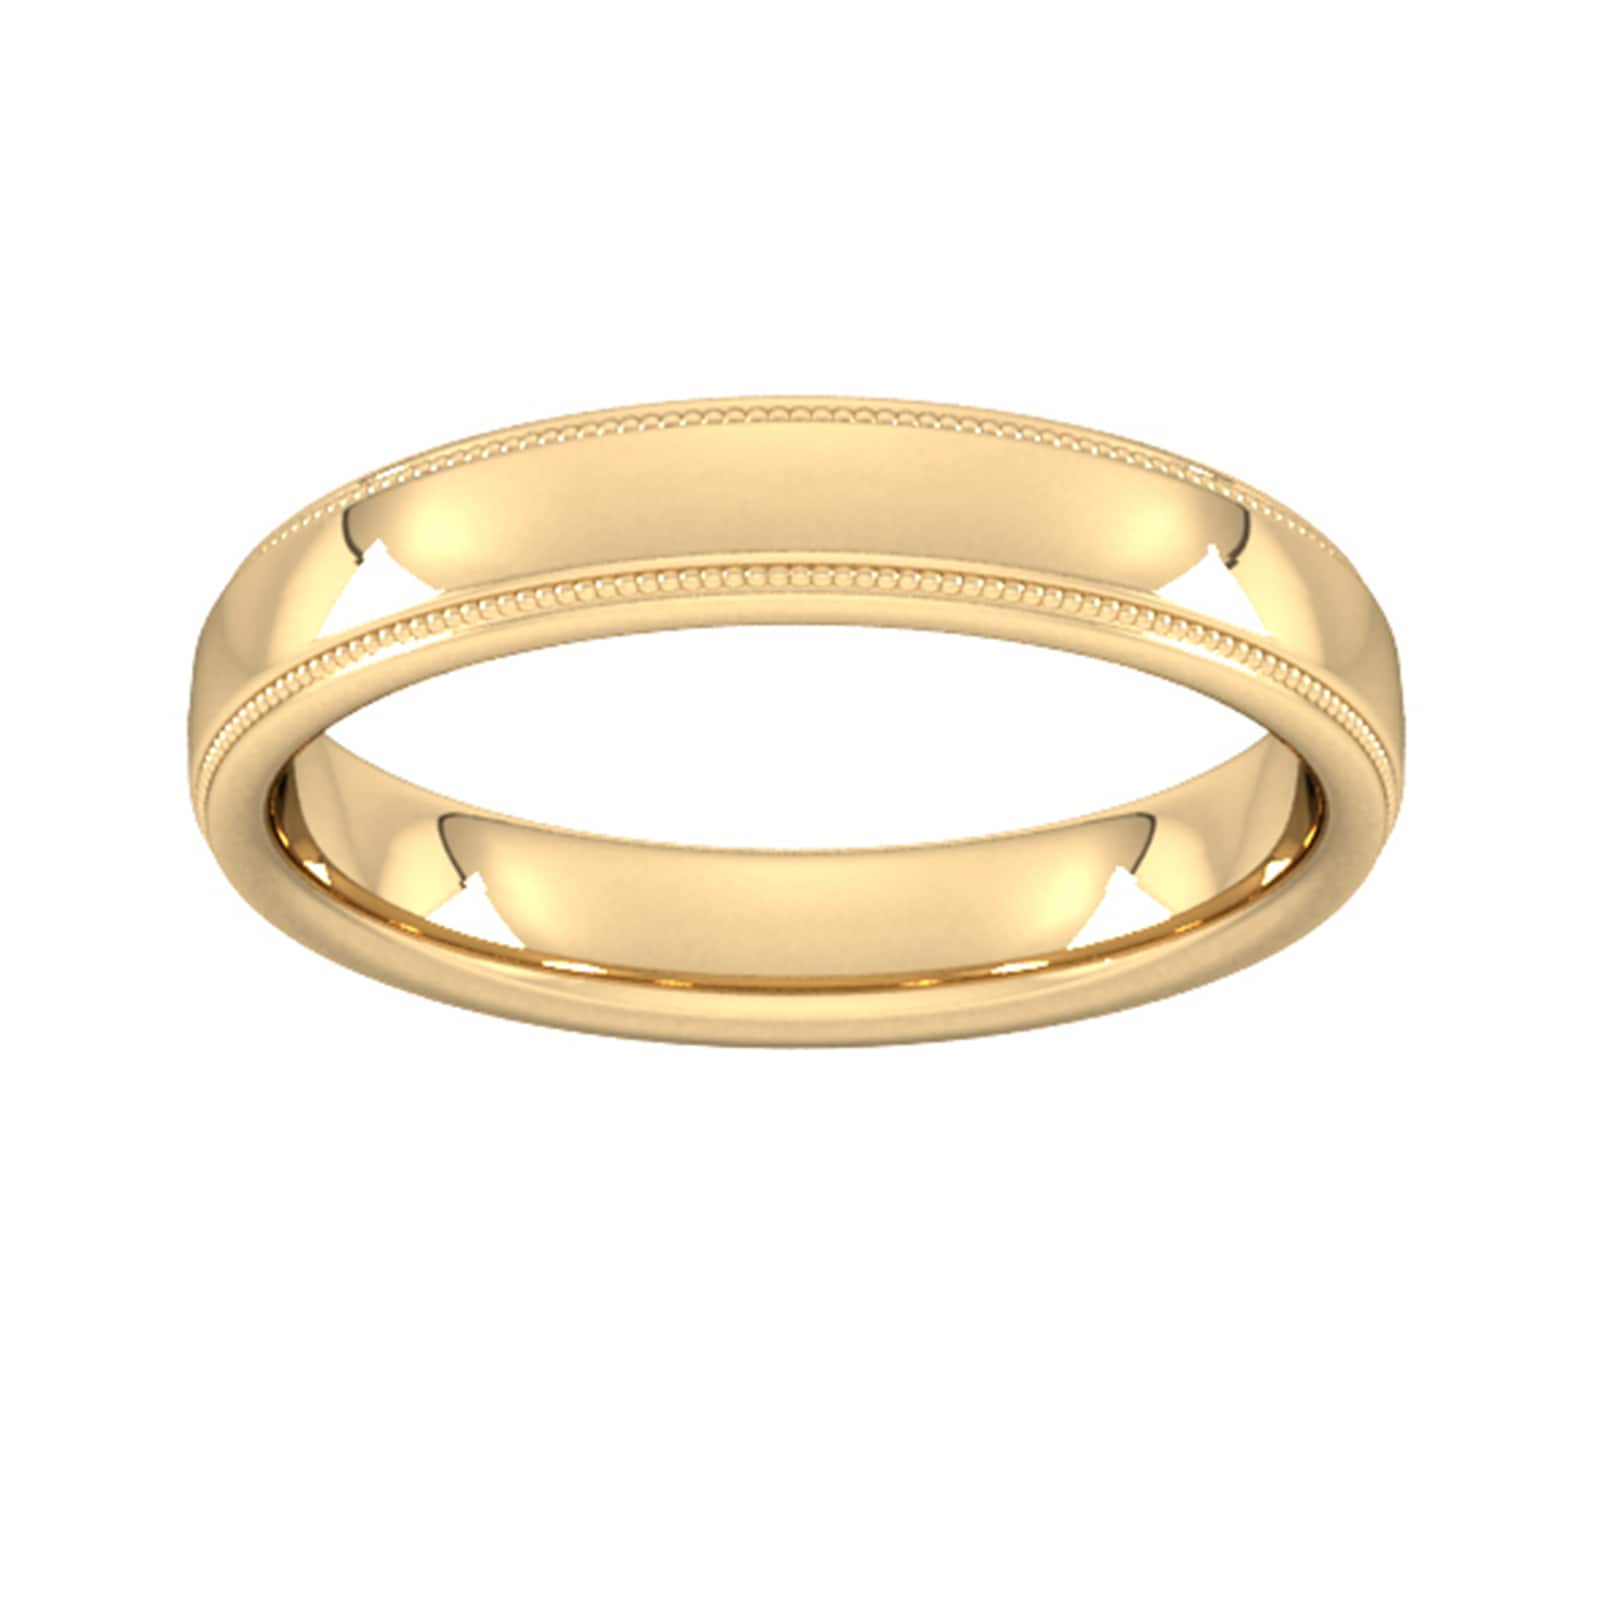 4mm Traditional Court Heavy Milgrain Edge Wedding Ring In 18 Carat Yellow Gold - Ring Size G